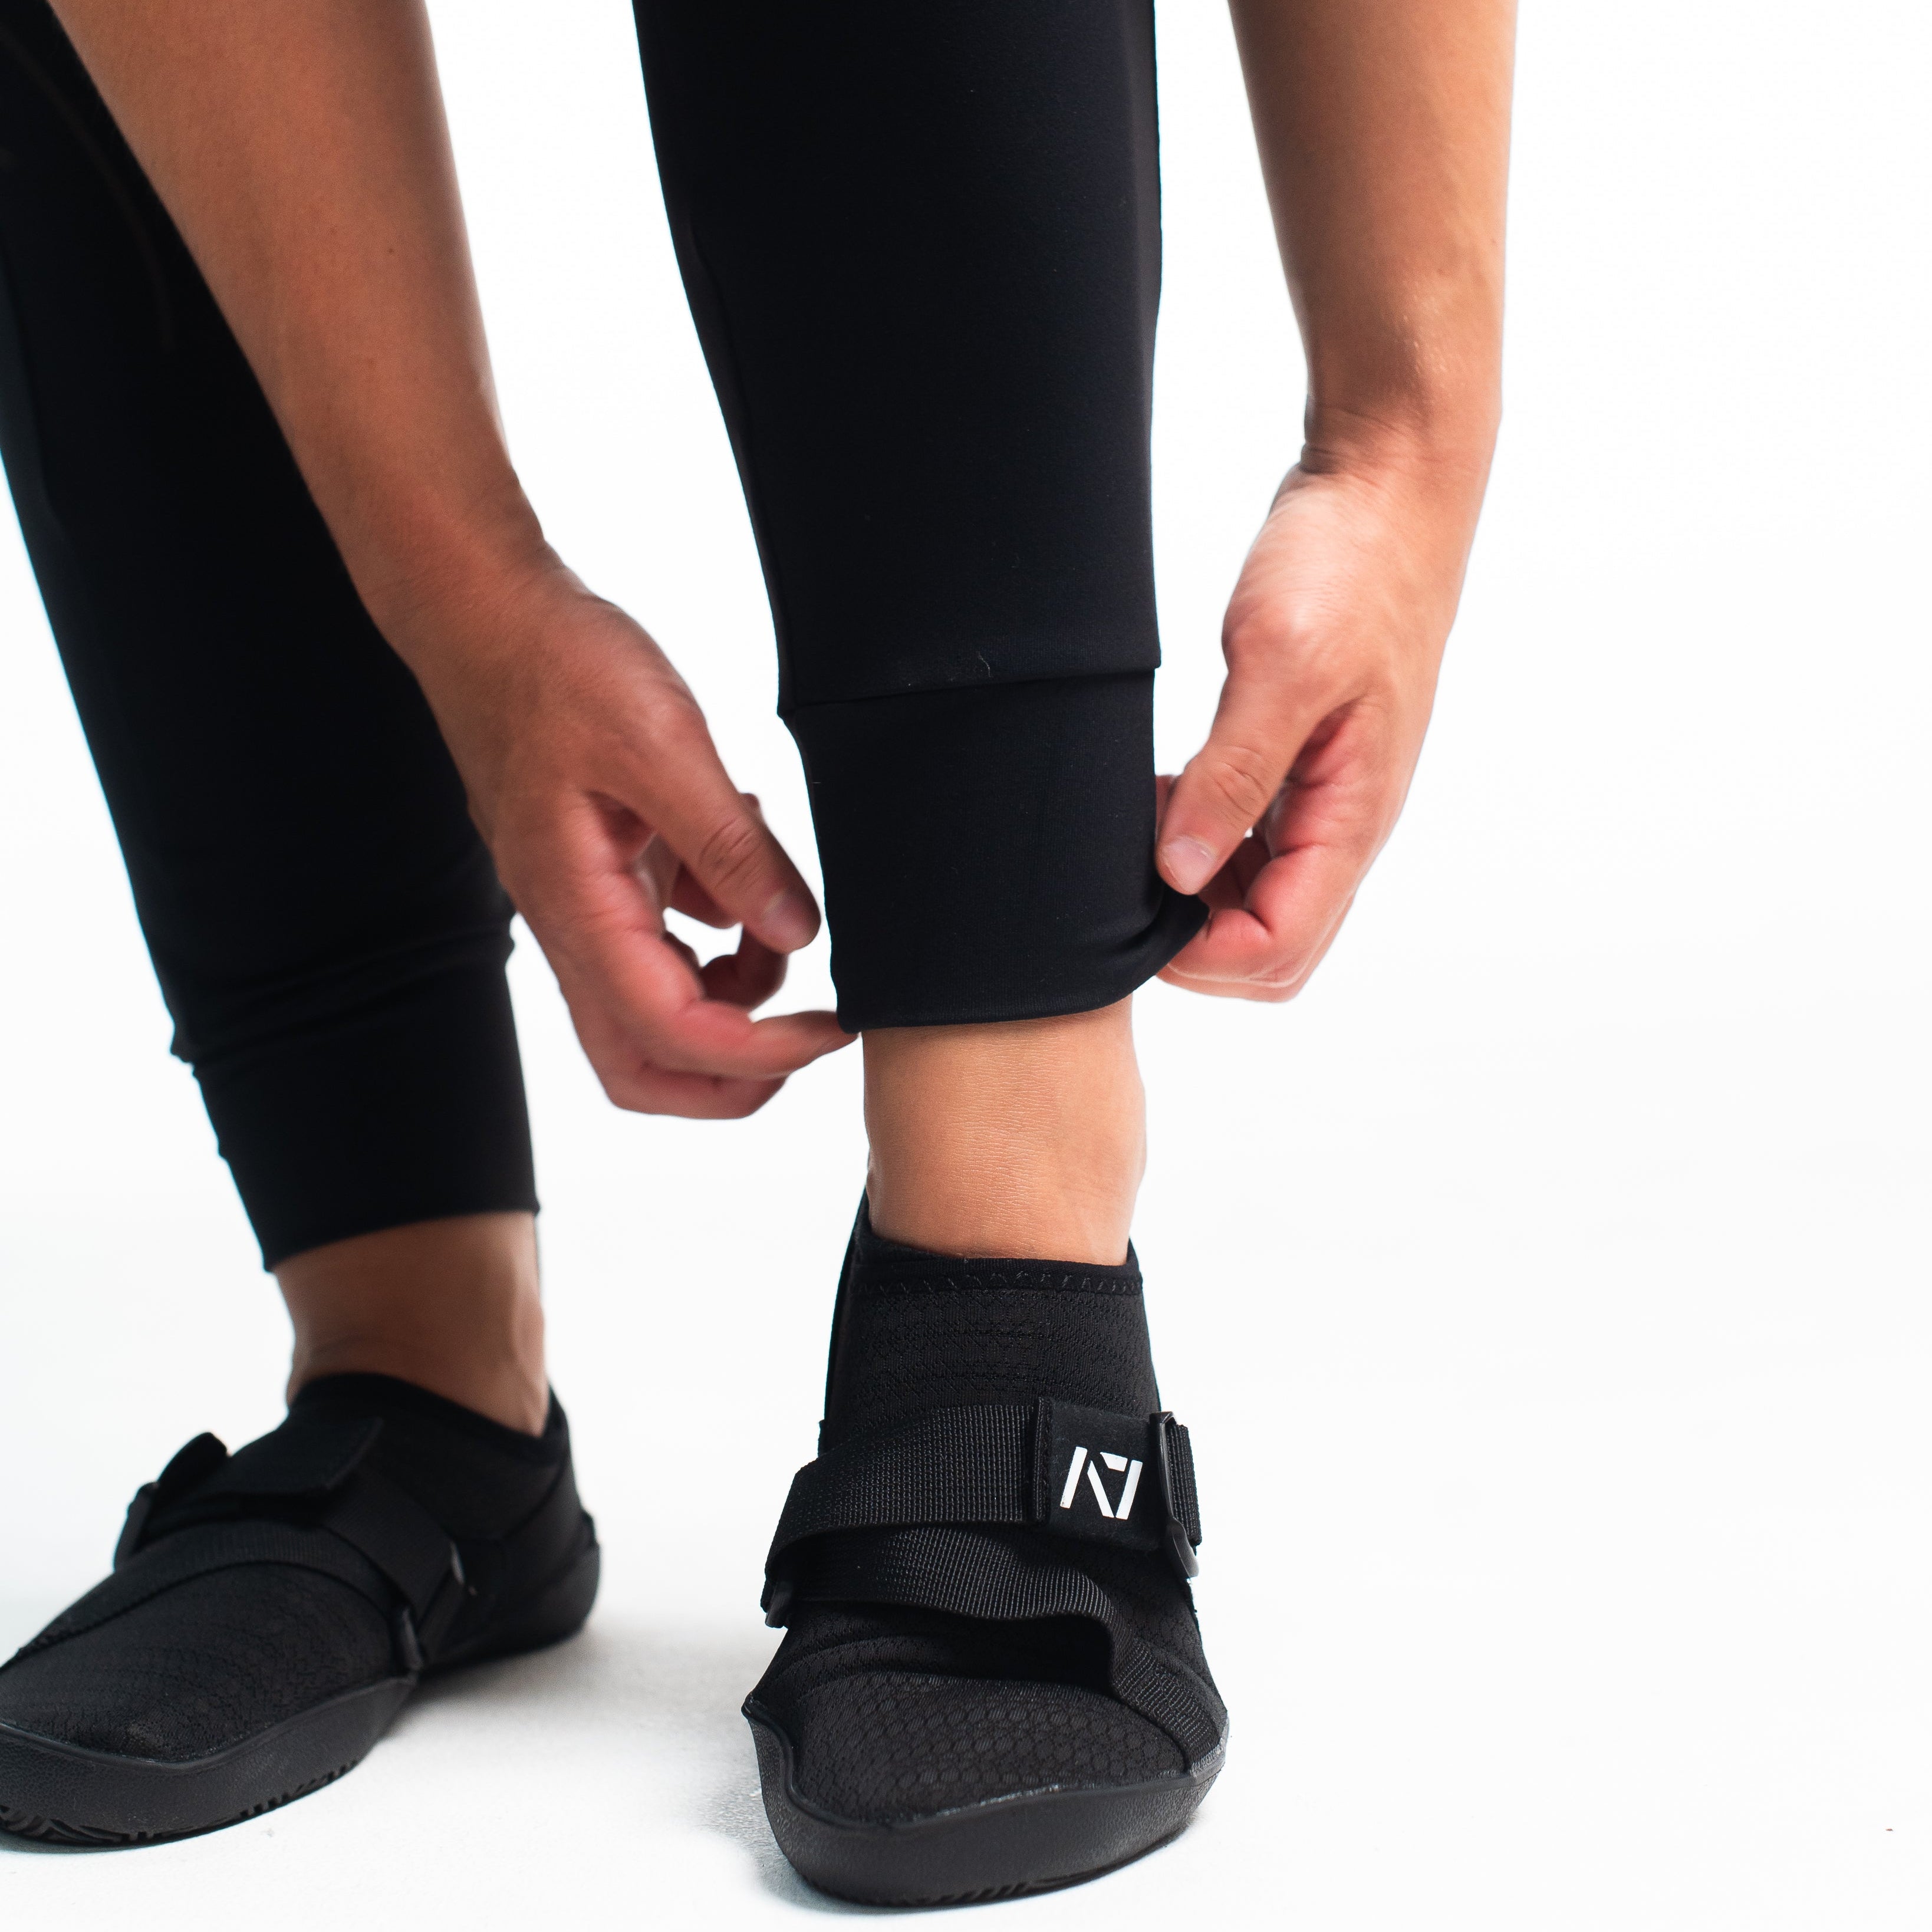 Defy joggers are just as comfortable in the gym as they are going out. These are made with premium moisture-wicking 4-way-stretch material for greater range of motion. These are a great fit for both men and women and offer deep zippered pockets and tapered leg design. Purchase Stealth Defy Joggers from A7 UK shipping to UK or A7 Europe shipping to EU.